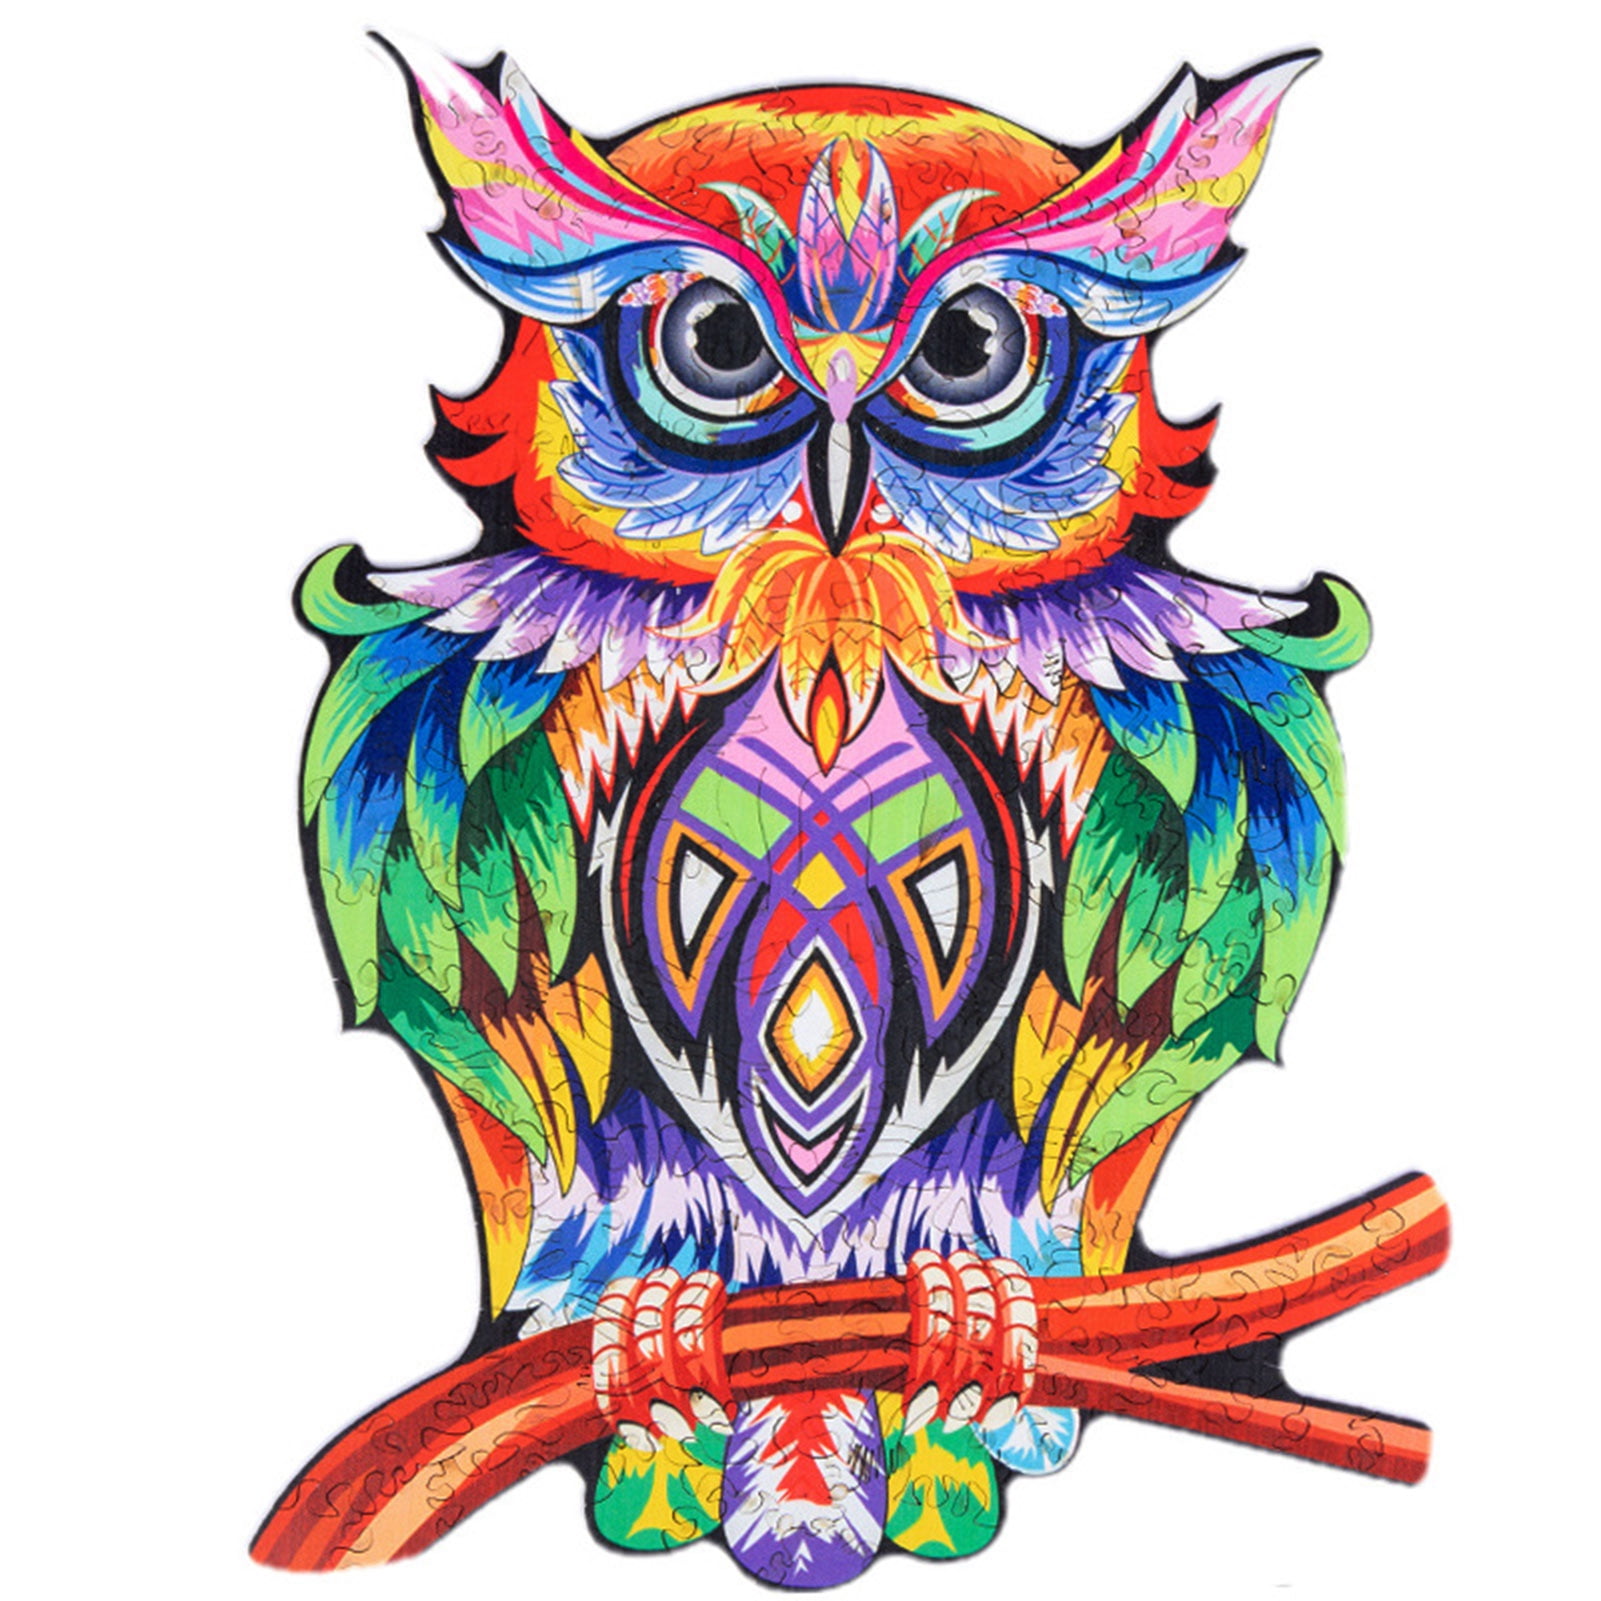 Owl Shape Wooden Puzzles Jigsaws Pieces Developmental Toys for Adult Kids Gifts 